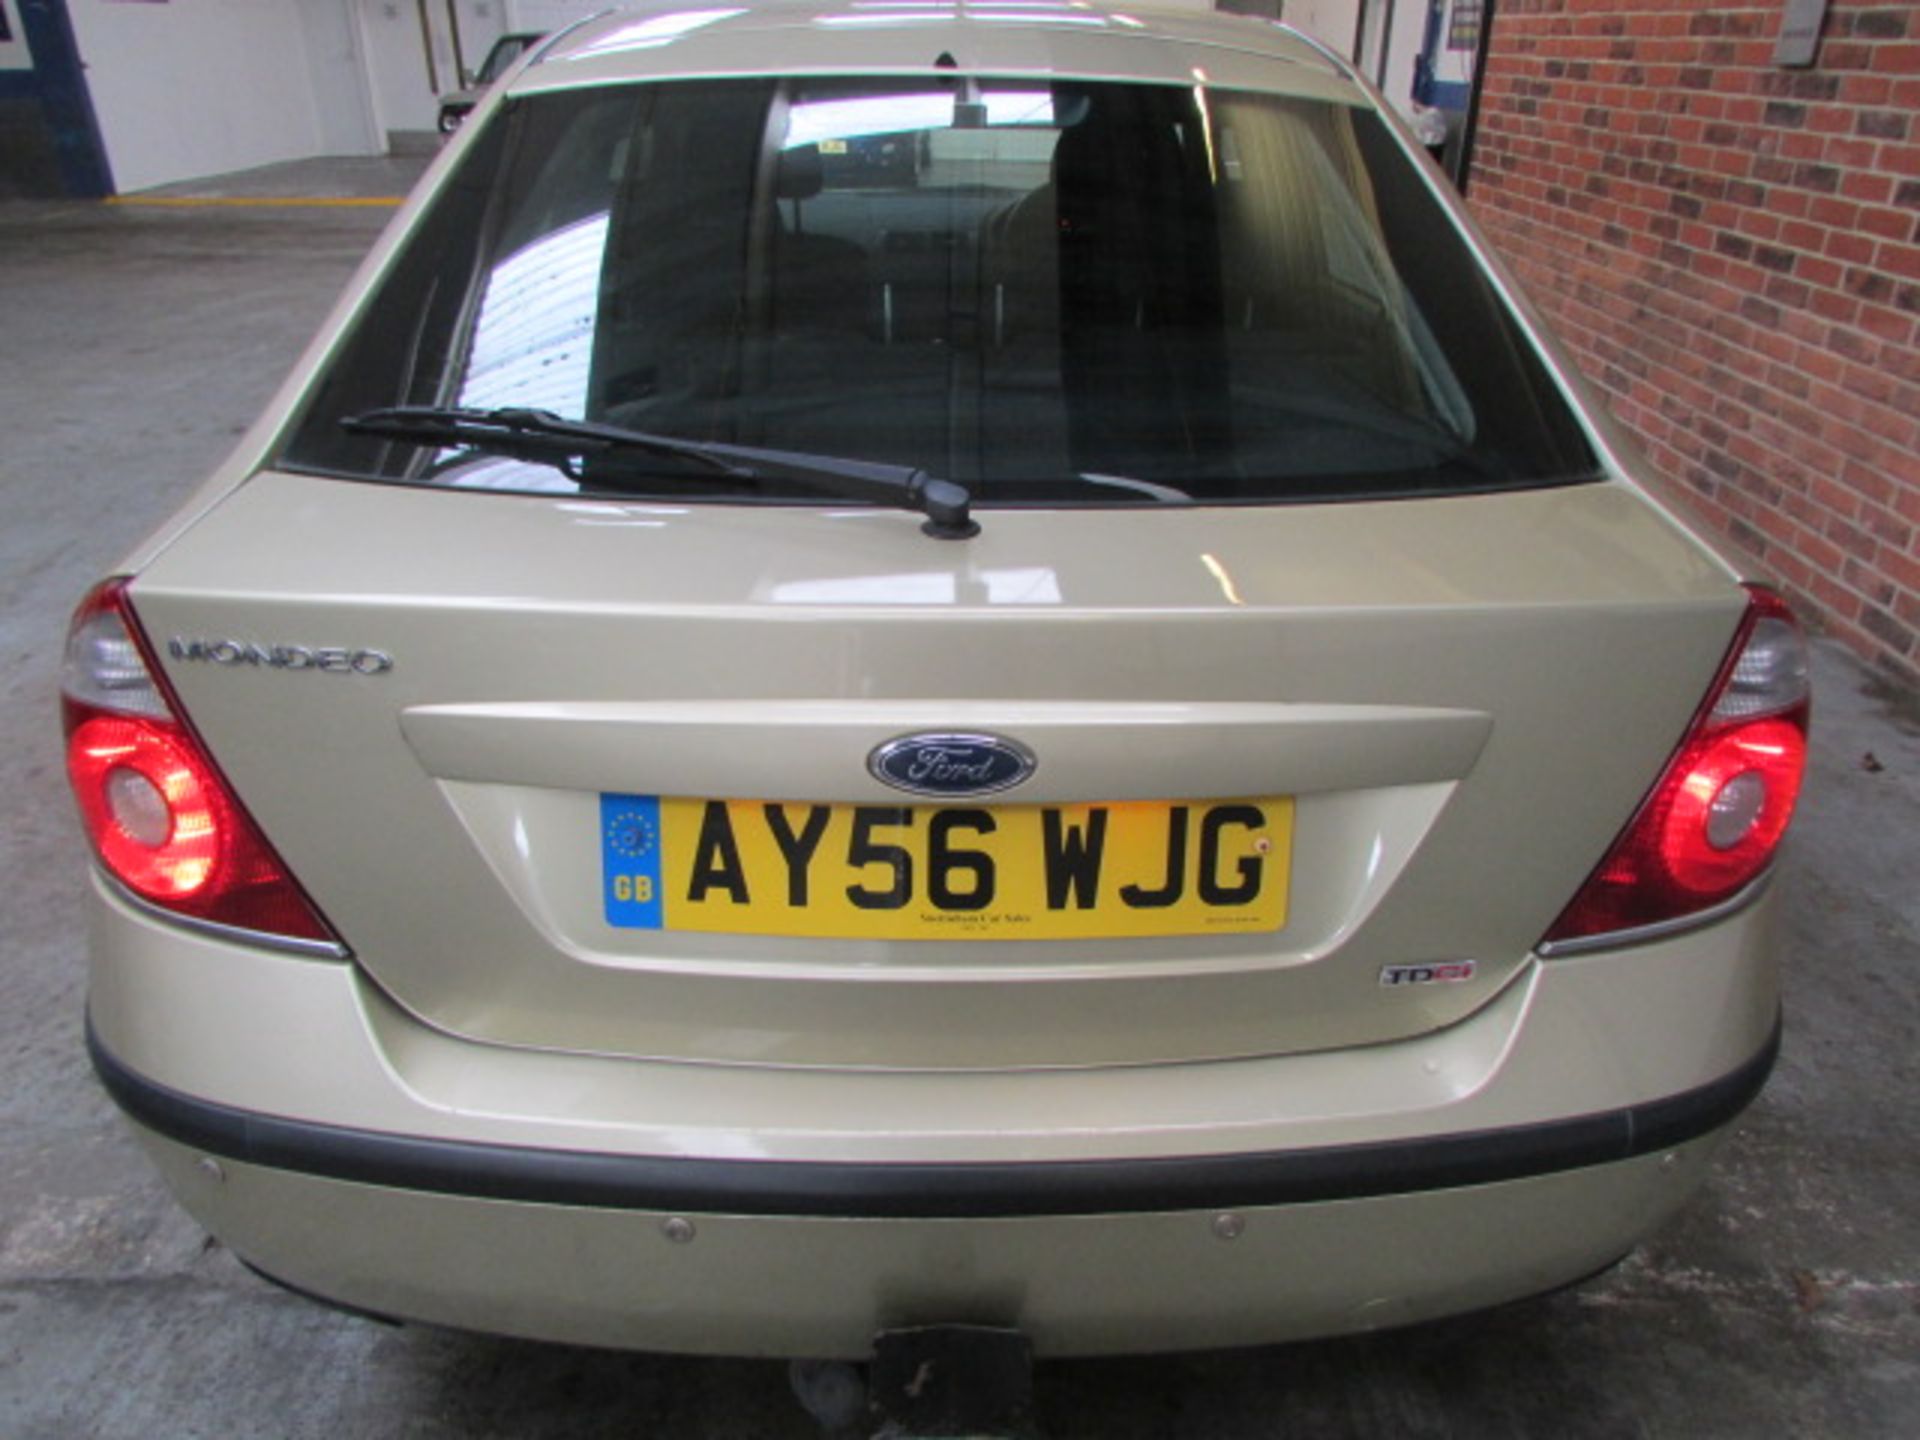 56 06 Ford Mondeo LX TDCi 130 - Image 2 of 11